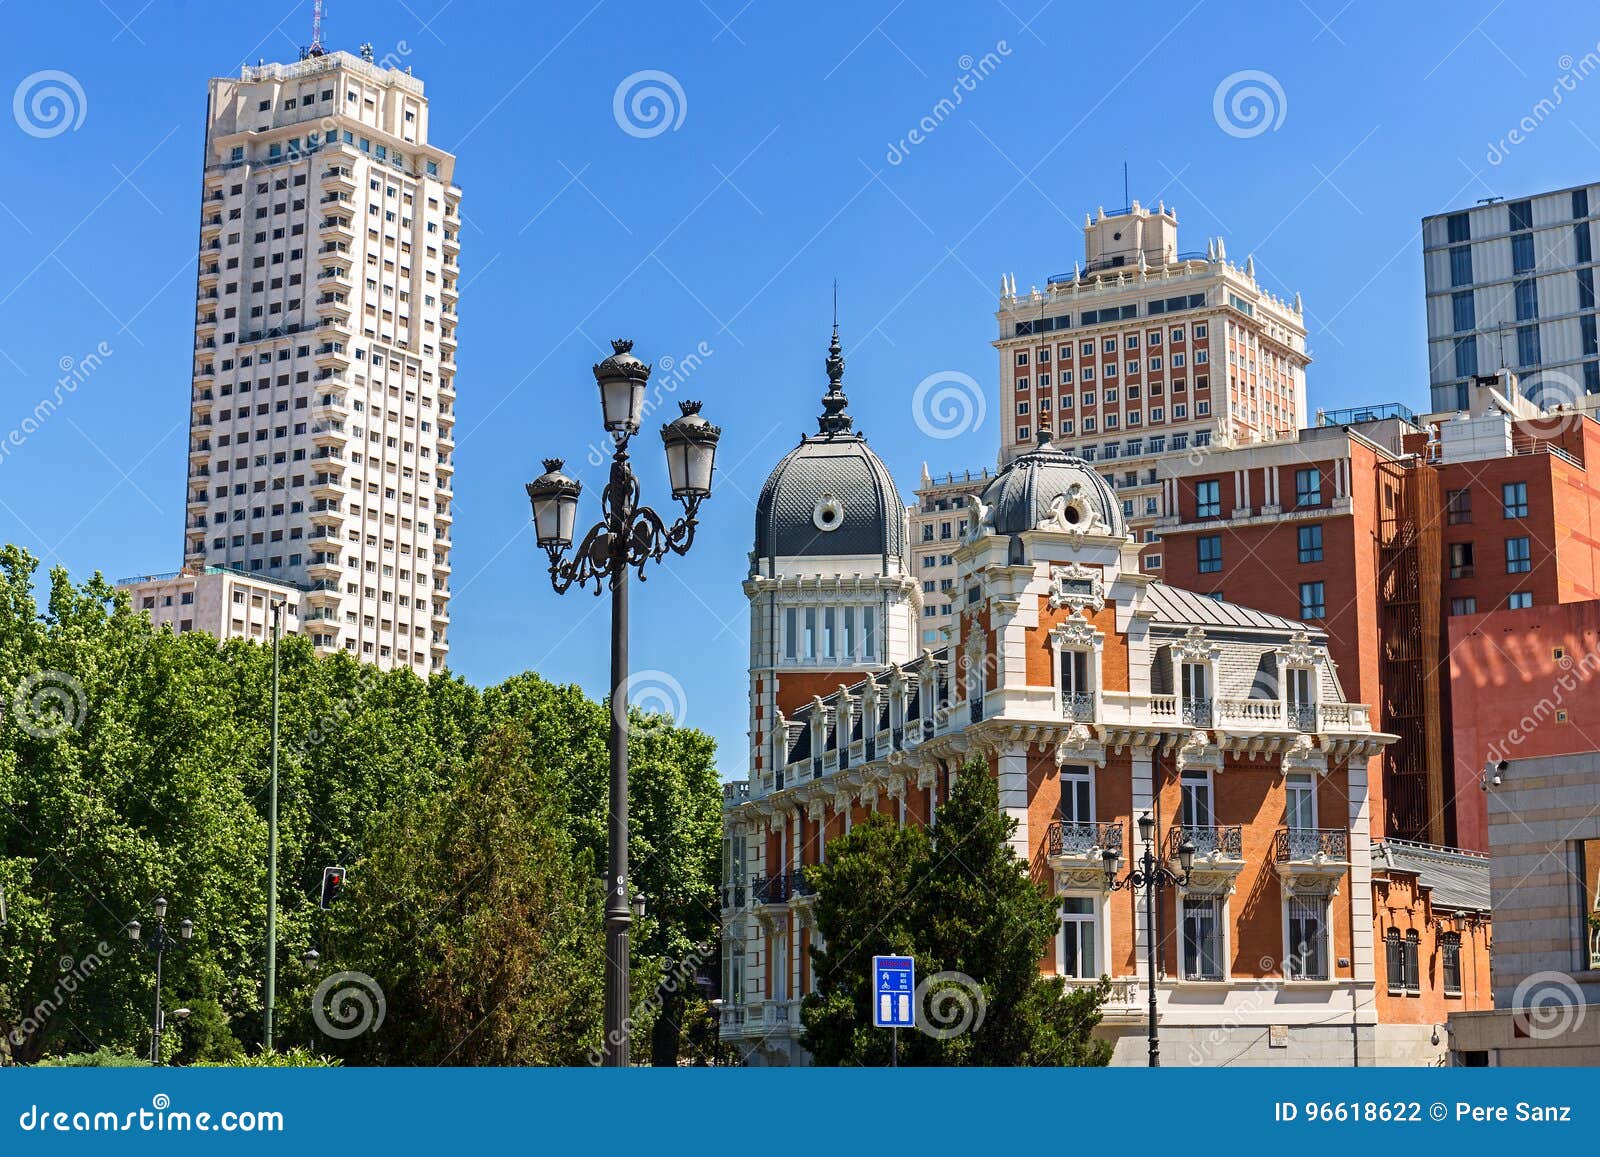 arquitecture styles contrast in madrid, spain